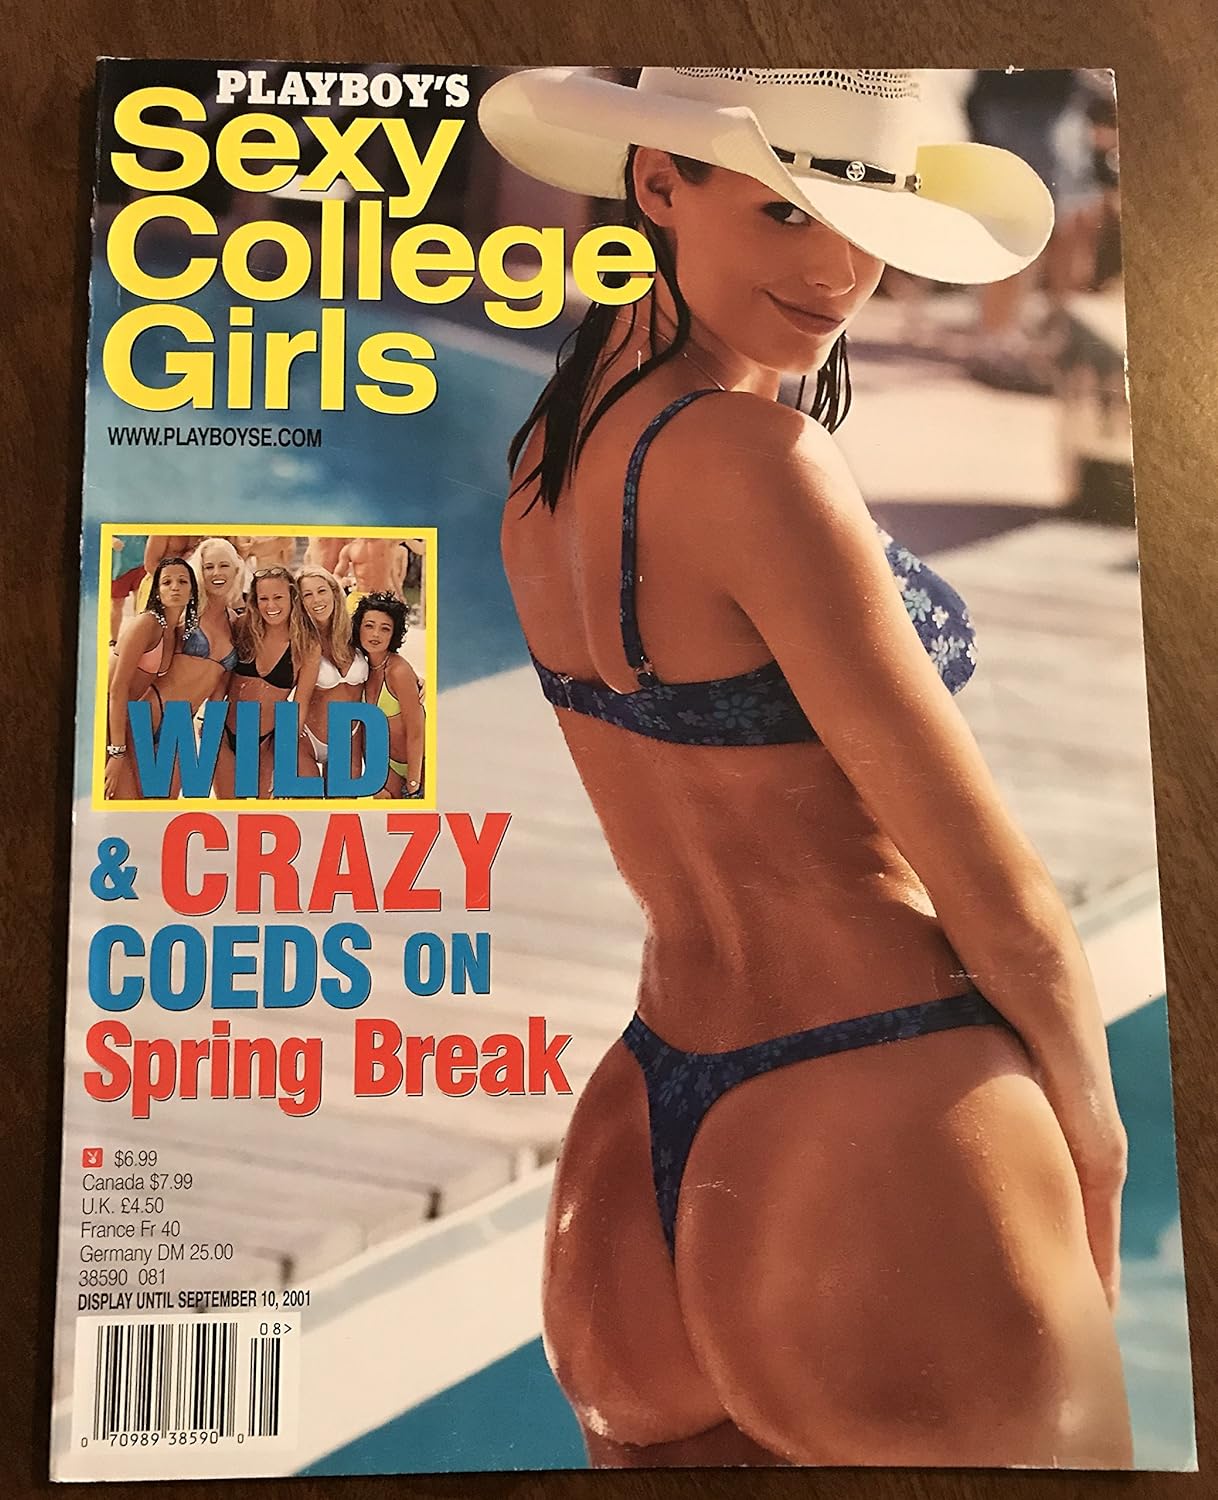 chandrani sarkar recommends college coeds sexy pic